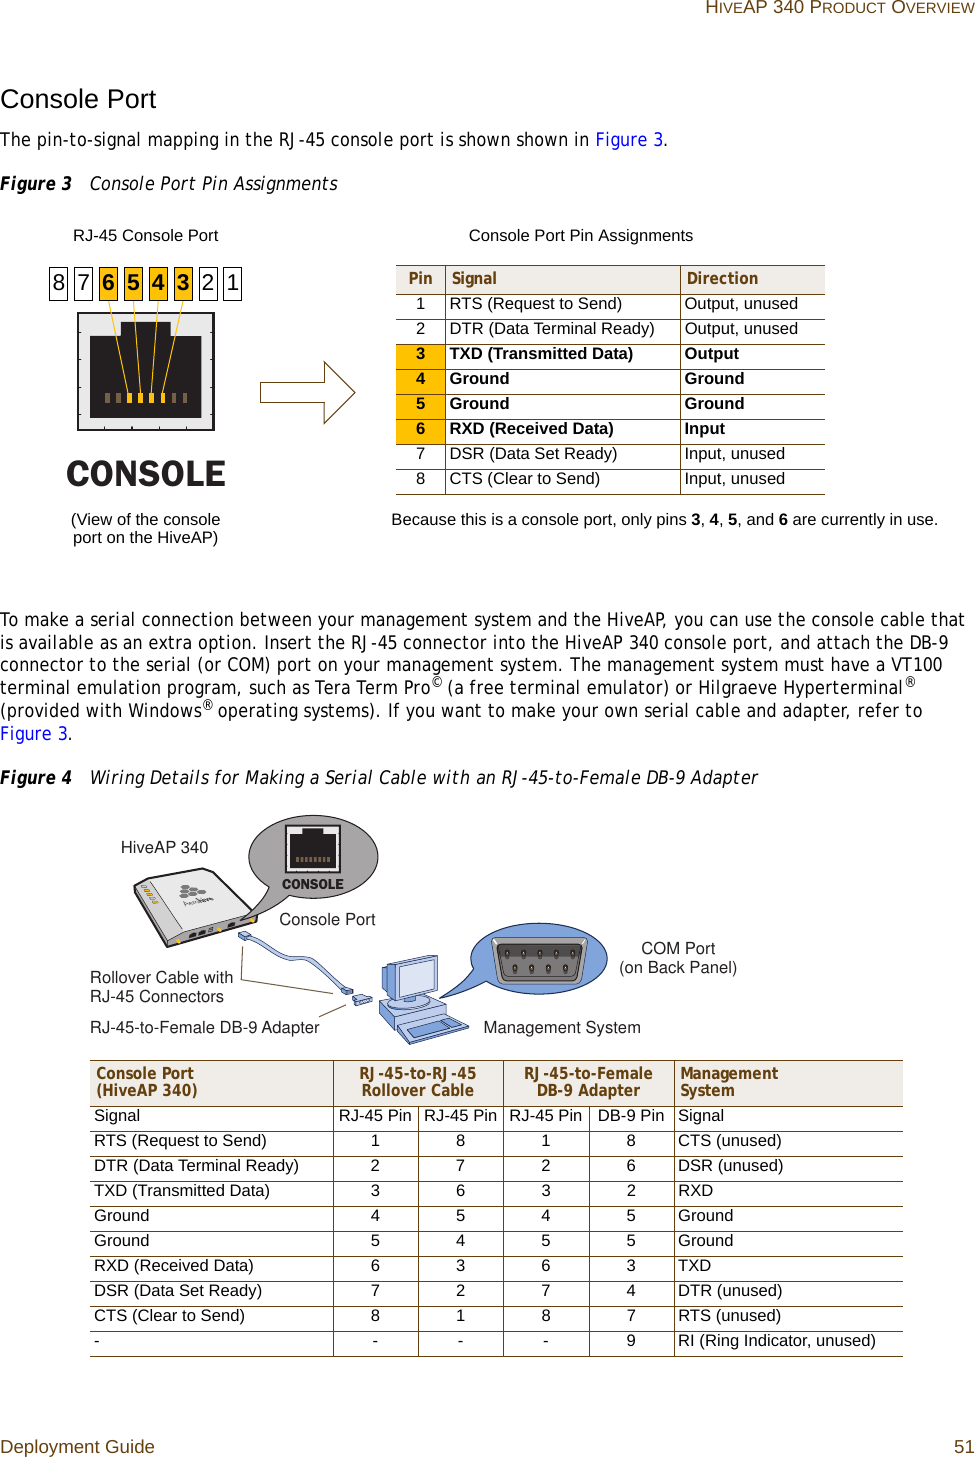 Deployment Guide 51 HIVEAP 340 PRODUCT OVERVIEWConsole PortThe pin-to-signal mapping in the RJ-45 console port is shown shown in Figure 3.Figure 3  Console Port Pin AssignmentsTo make a serial connection between your management system and the HiveAP, you can use the console cable that is available as an extra option. Insert the RJ-45 connector into the HiveAP 340 console port, and attach the DB-9 connector to the serial (or COM) port on your management system. The management system must have a VT100 terminal emulation program, such as Tera Term Pro© (a free terminal emulator) or Hilgraeve Hyperterminal® (provided with Windows® operating systems). If you want to make your own serial cable and adapter, refer to Figure 3.Figure 4  Wiring Details for Making a Serial Cable with an RJ-45-to-Female DB-9 AdapterCONSOLEPin Signal Direction1 RTS (Request to Send) Output, unused2 DTR (Data Terminal Ready) Output, unused3 TXD (Transmitted Data) Output4 Ground Ground5 Ground Ground6 RXD (Received Data) Input7 DSR (Data Set Ready) Input, unused8 CTS (Clear to Send) Input, unusedRJ-45 Console Port(View of the console port on the HiveAP) Because this is a console port, only pins 3, 4, 5, and 6 are currently in use.Console Port Pin Assignments613457 28Rollover Cable with RJ-45 ConnectorsRJ-45-to-Female DB-9 AdapterConsole PortCOM Port (on Back Panel)CONSOLEManagement SystemHiveAP 340Console Port (HiveAP 340) RJ-45-to-RJ-45 Rollover Cable RJ-45-to-Female DB-9 Adapter Management SystemSignal RJ-45 Pin RJ-45 Pin RJ-45 Pin DB-9 Pin SignalRTS (Request to Send) 1 8 1 8 CTS (unused)DTR (Data Terminal Ready) 2 7 2 6 DSR (unused)TXD (Transmitted Data) 3 6 3 2 RXDGround 4 5 4 5 GroundGround 5 4 5 5 GroundRXD (Received Data) 6 3 6 3 TXDDSR (Data Set Ready) 7 2 7 4 DTR (unused)CTS (Clear to Send) 8 1 8 7 RTS (unused)- - - - 9 RI (Ring Indicator, unused)